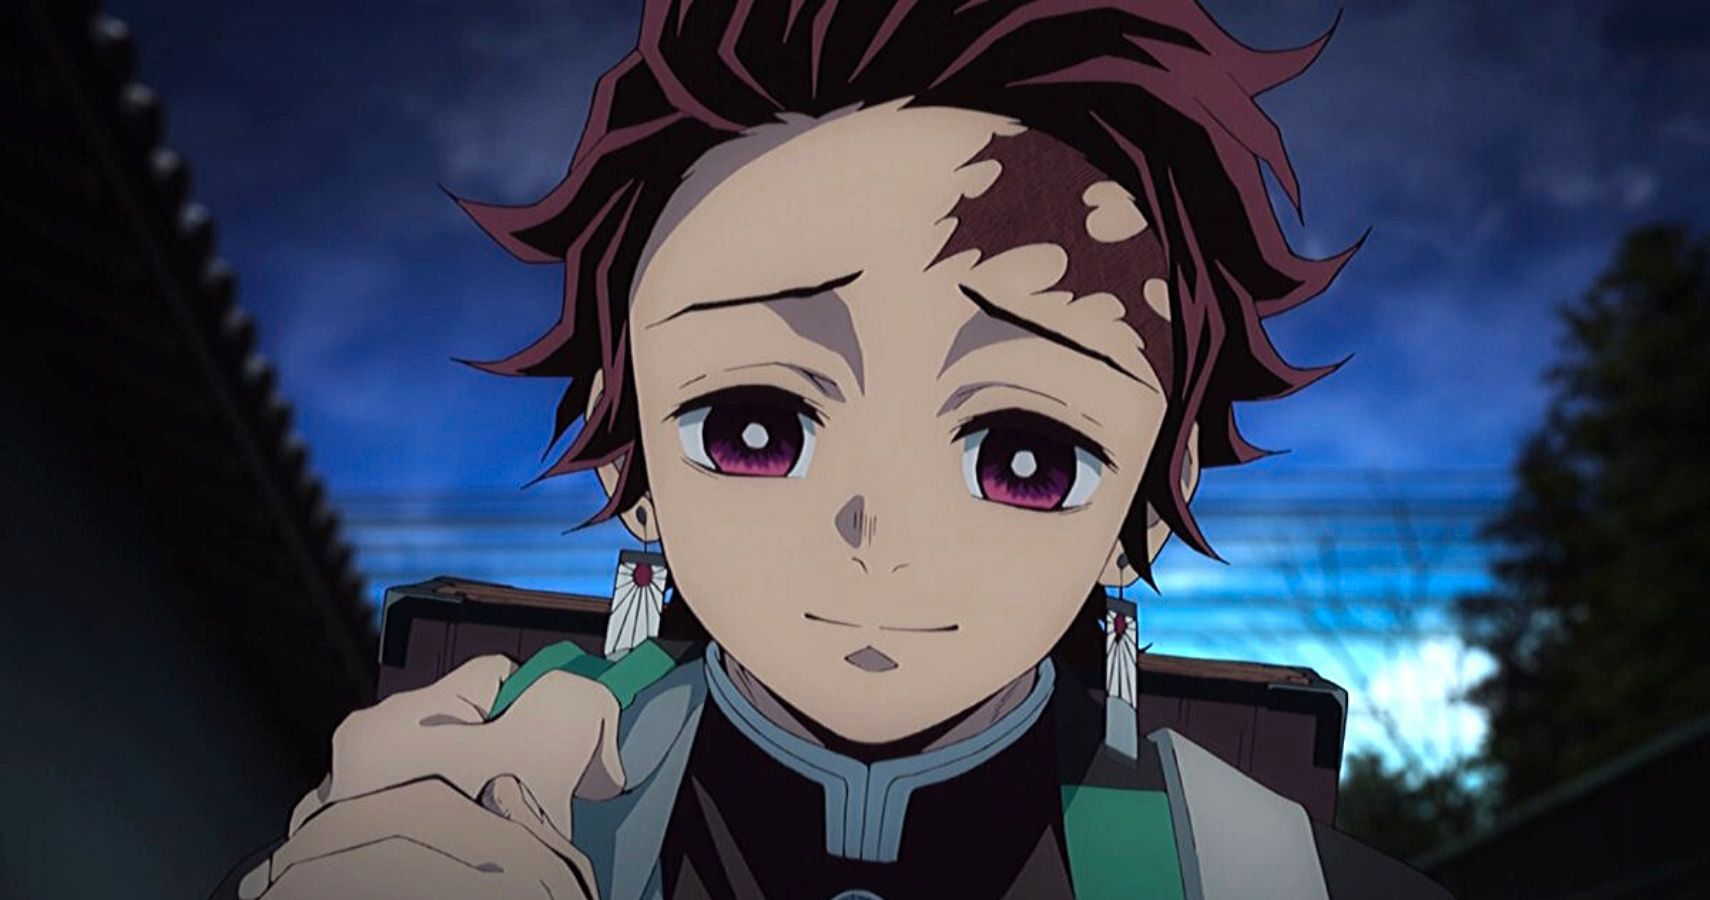 Tanjiro shows everyone, from friends to strangers to enemies, empathy in Demon Slayer.